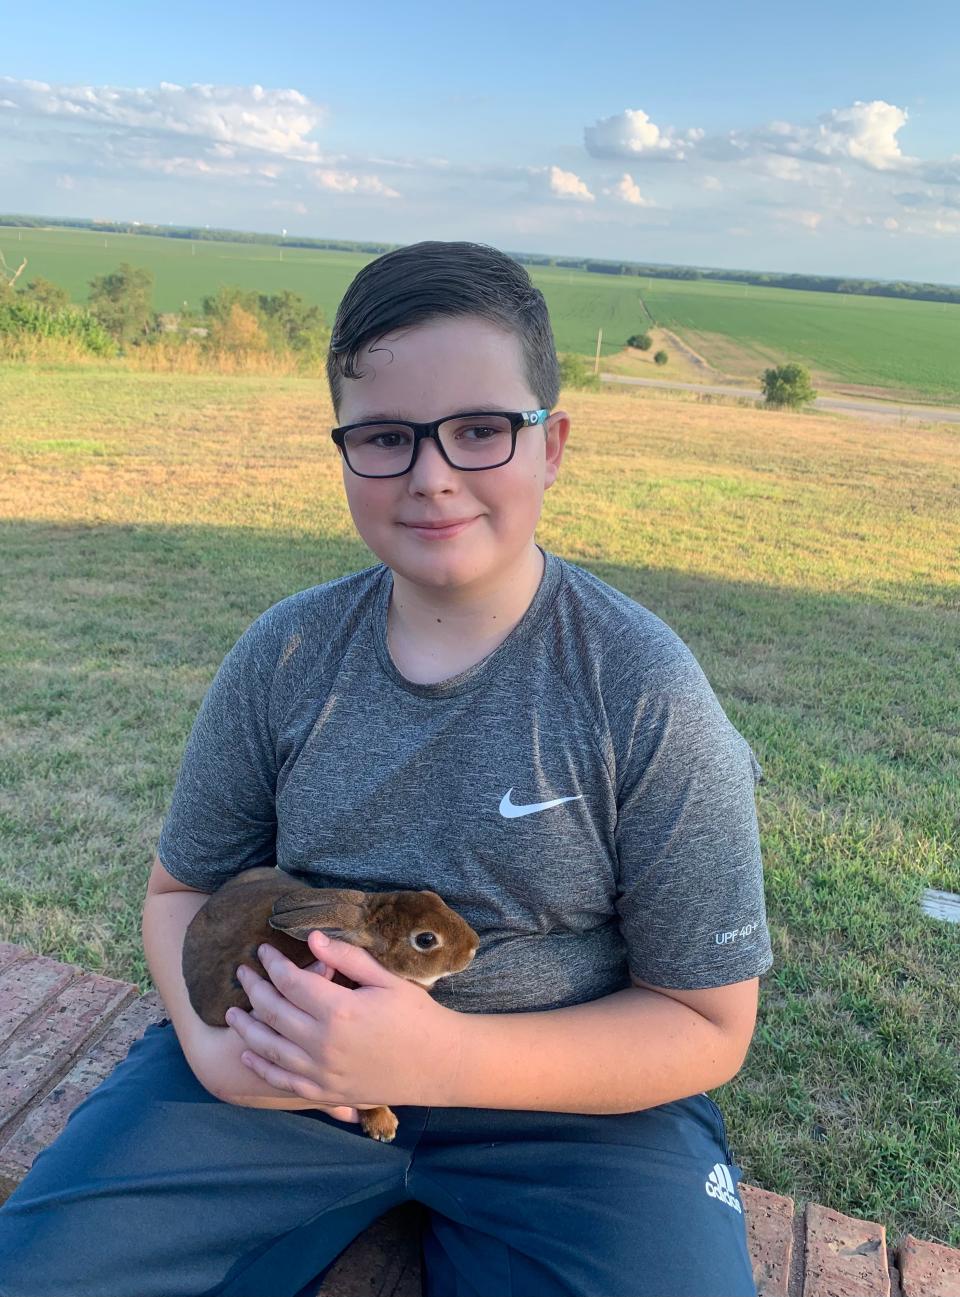 Caleb Schlatter with one of the rabbits he raises and shows.